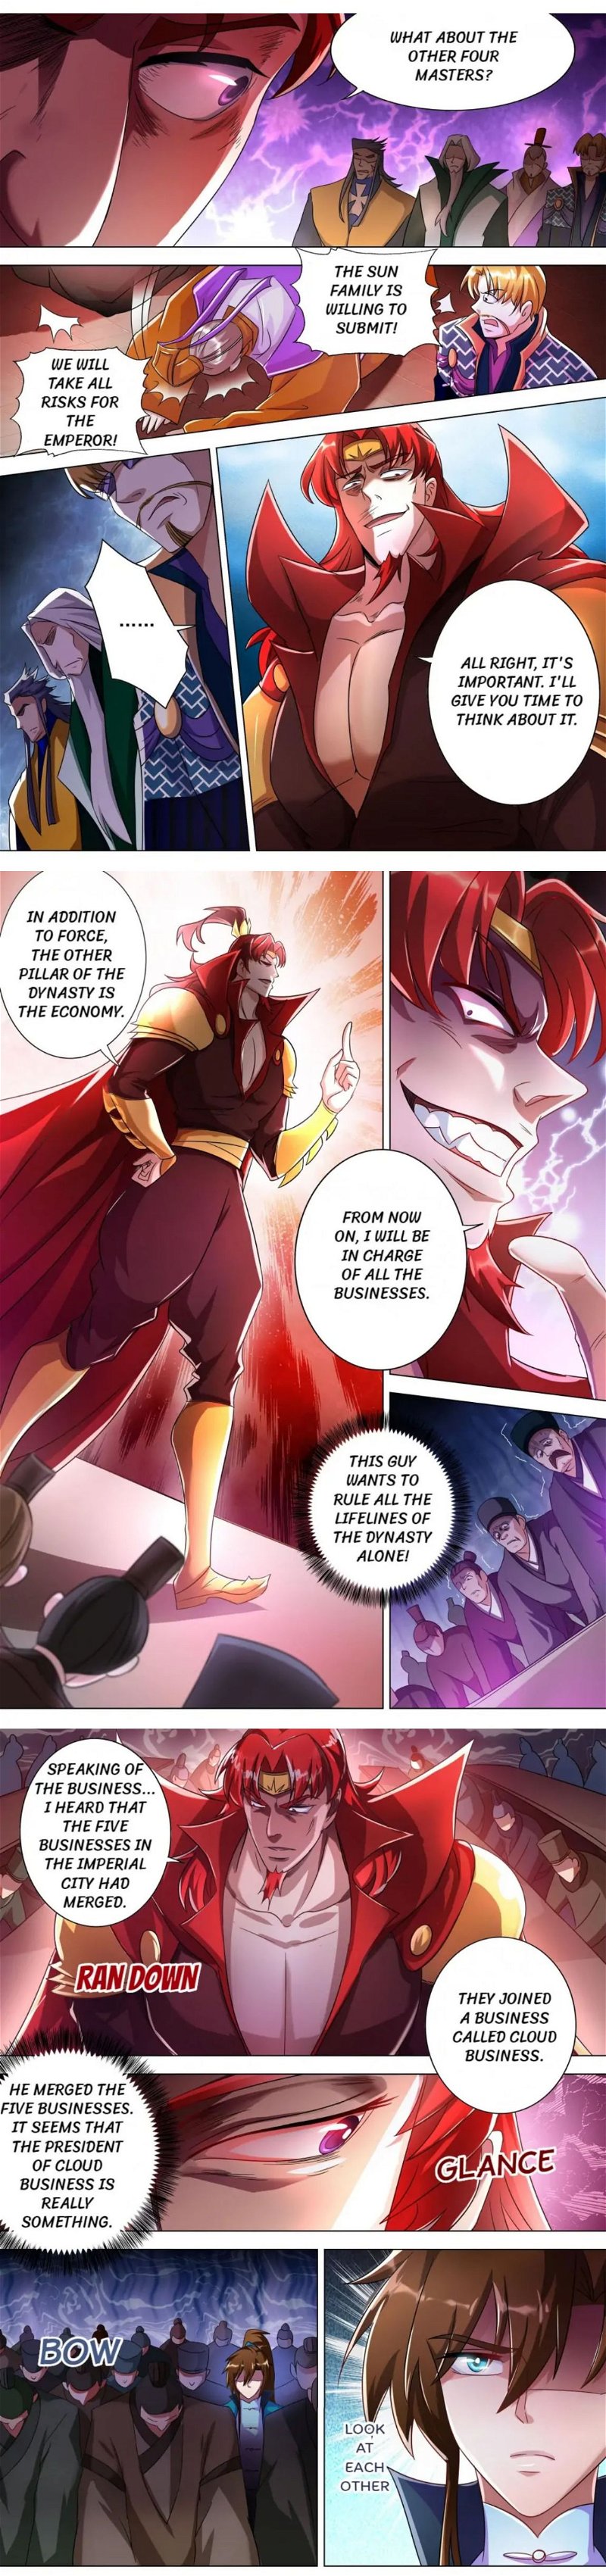 Spirit Sword Sovereign Chapter 267 - Page 4